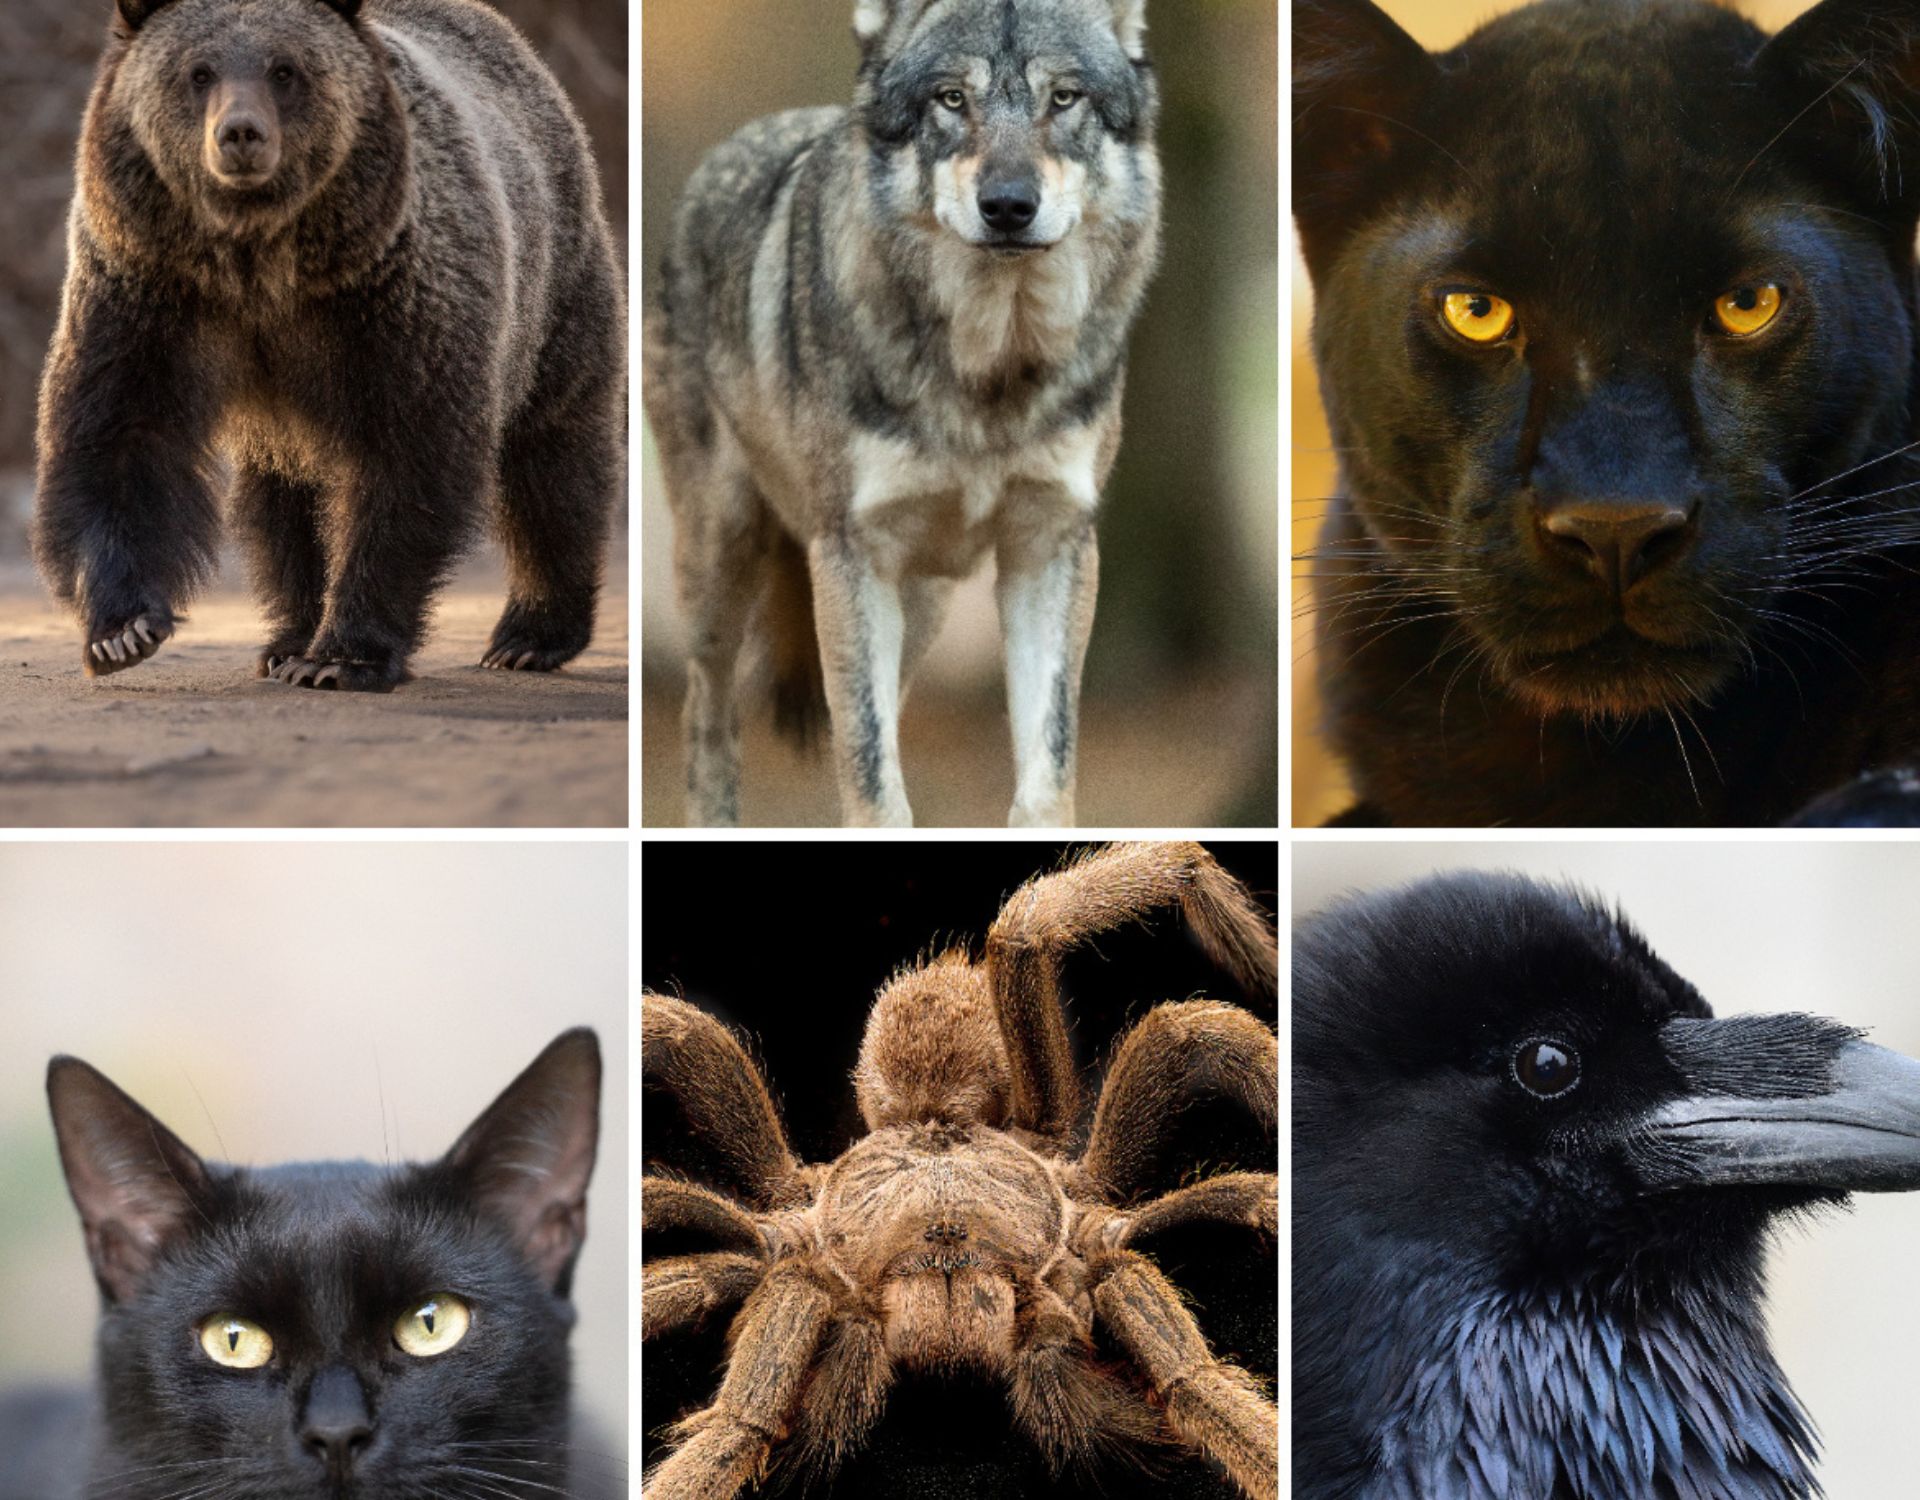 Personality test: Your choice of animal reveals your dark side